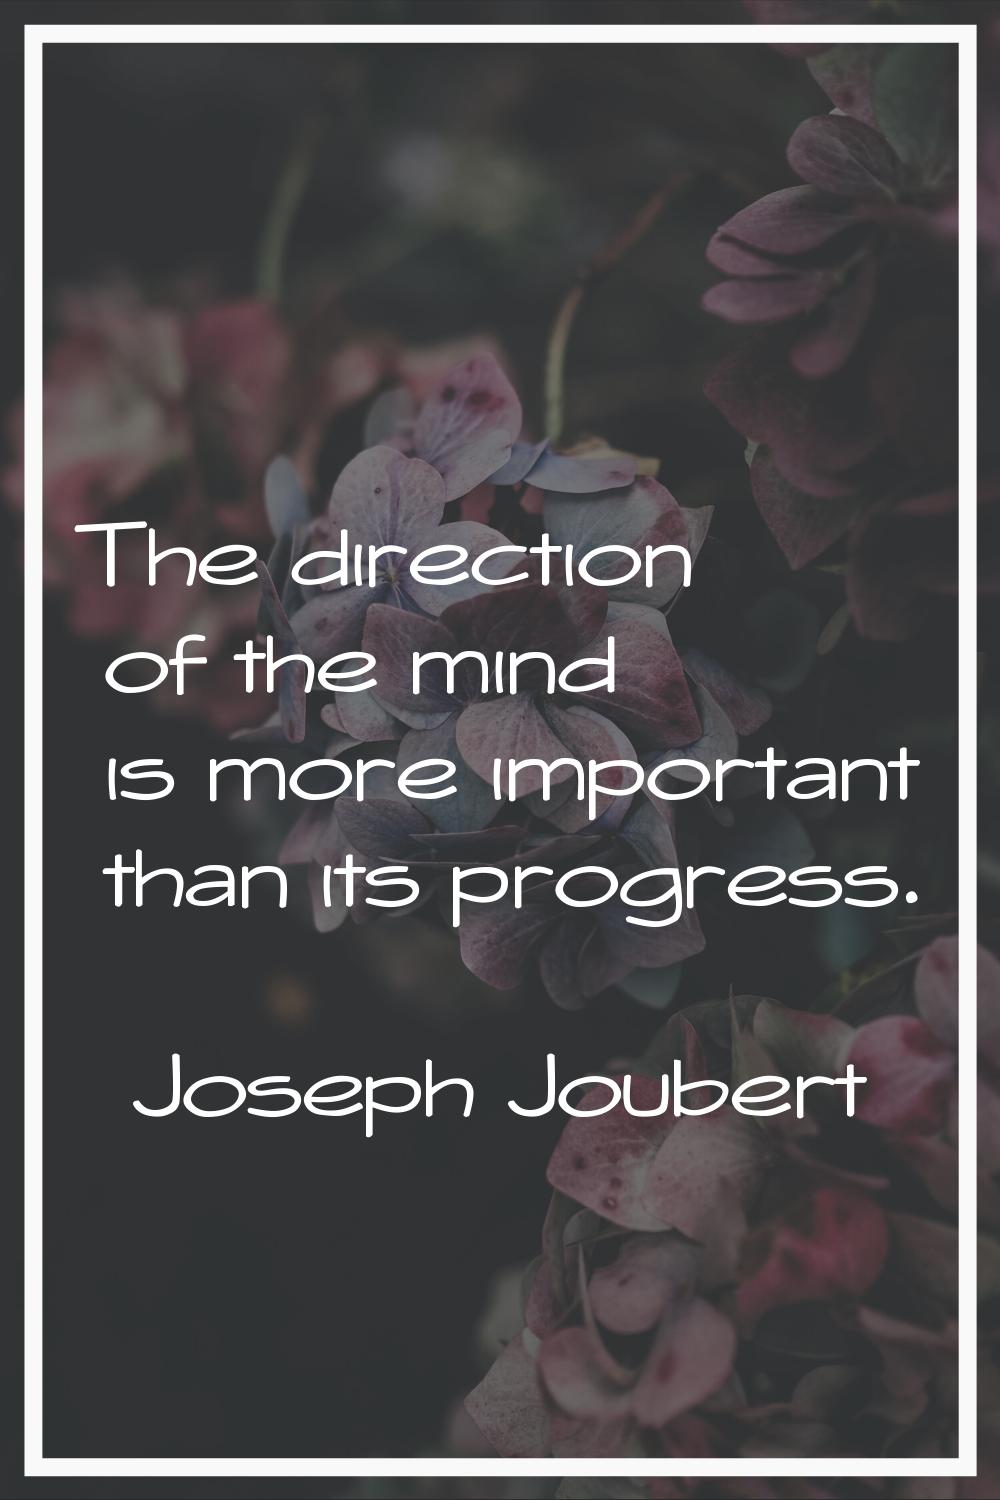 The direction of the mind is more important than its progress.